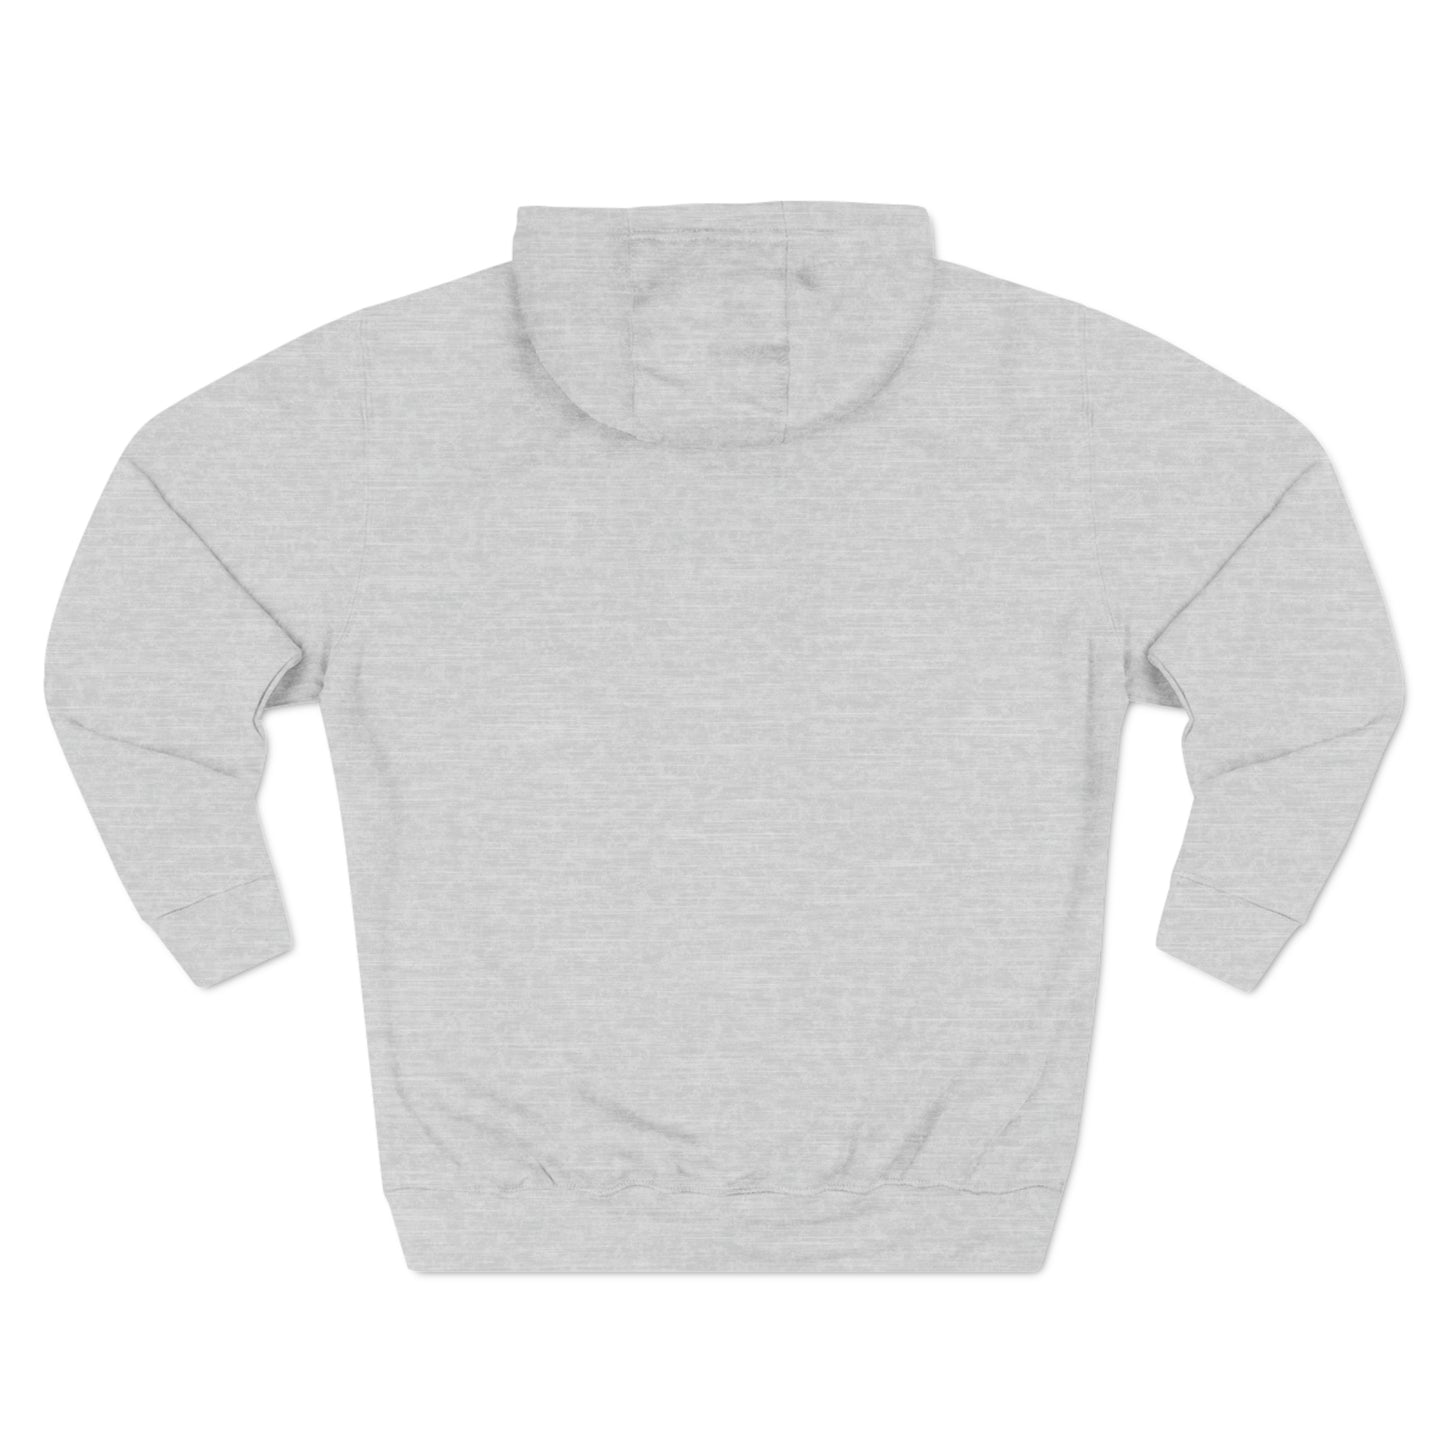 Plain light grey Unisex Premium Pullover Hoodie with long sleeves and a hood, displayed on a white background. The hoodie is laid flat, showcasing the front view with no visible logos or designs, evoking the minimalist style of Cabbagetown, Toronto.